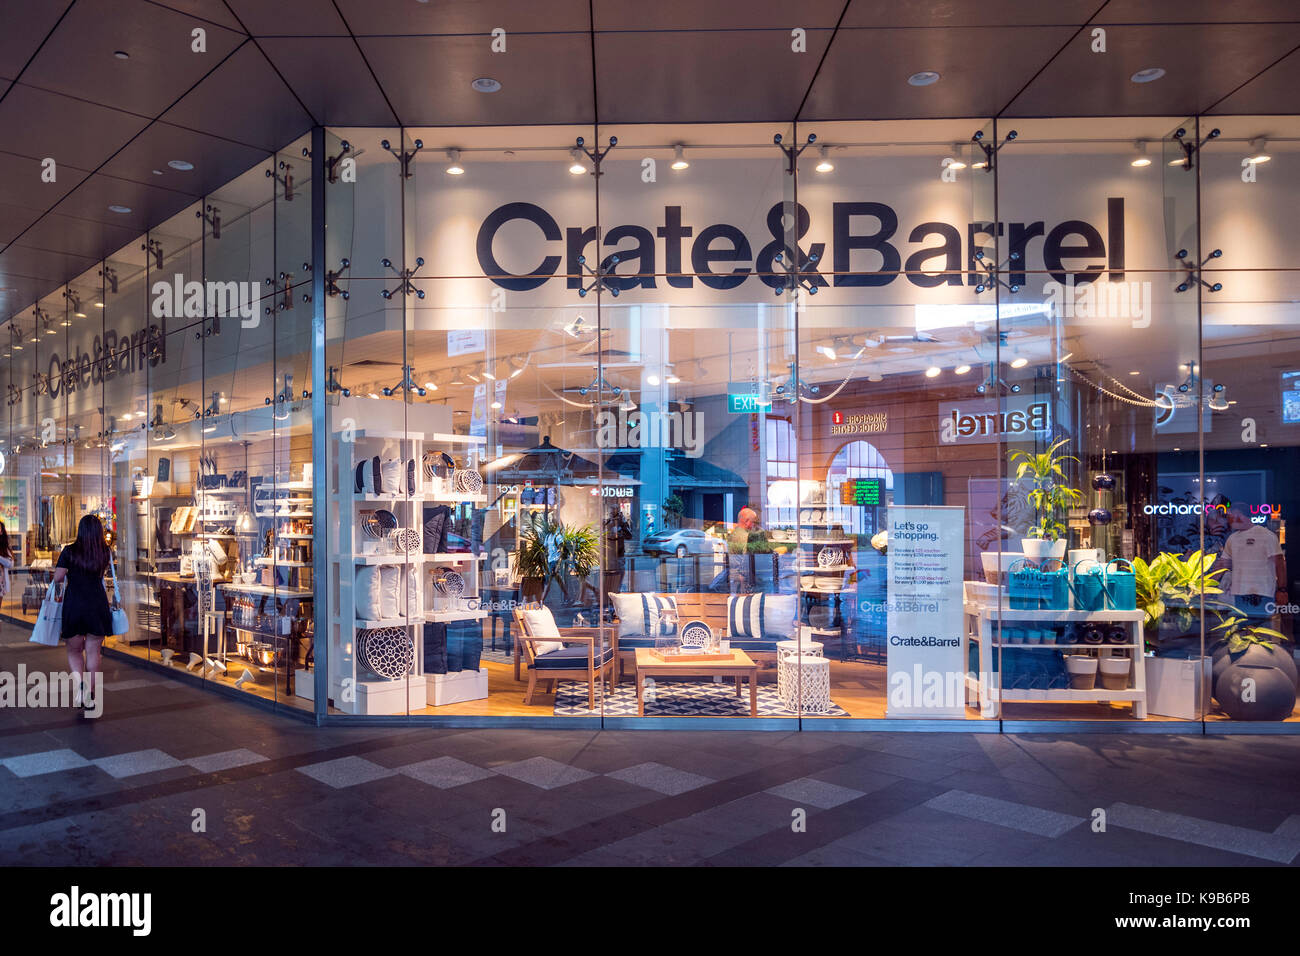 Crate And Barrel Furniture Store Orchard Gateway Shopping Mall